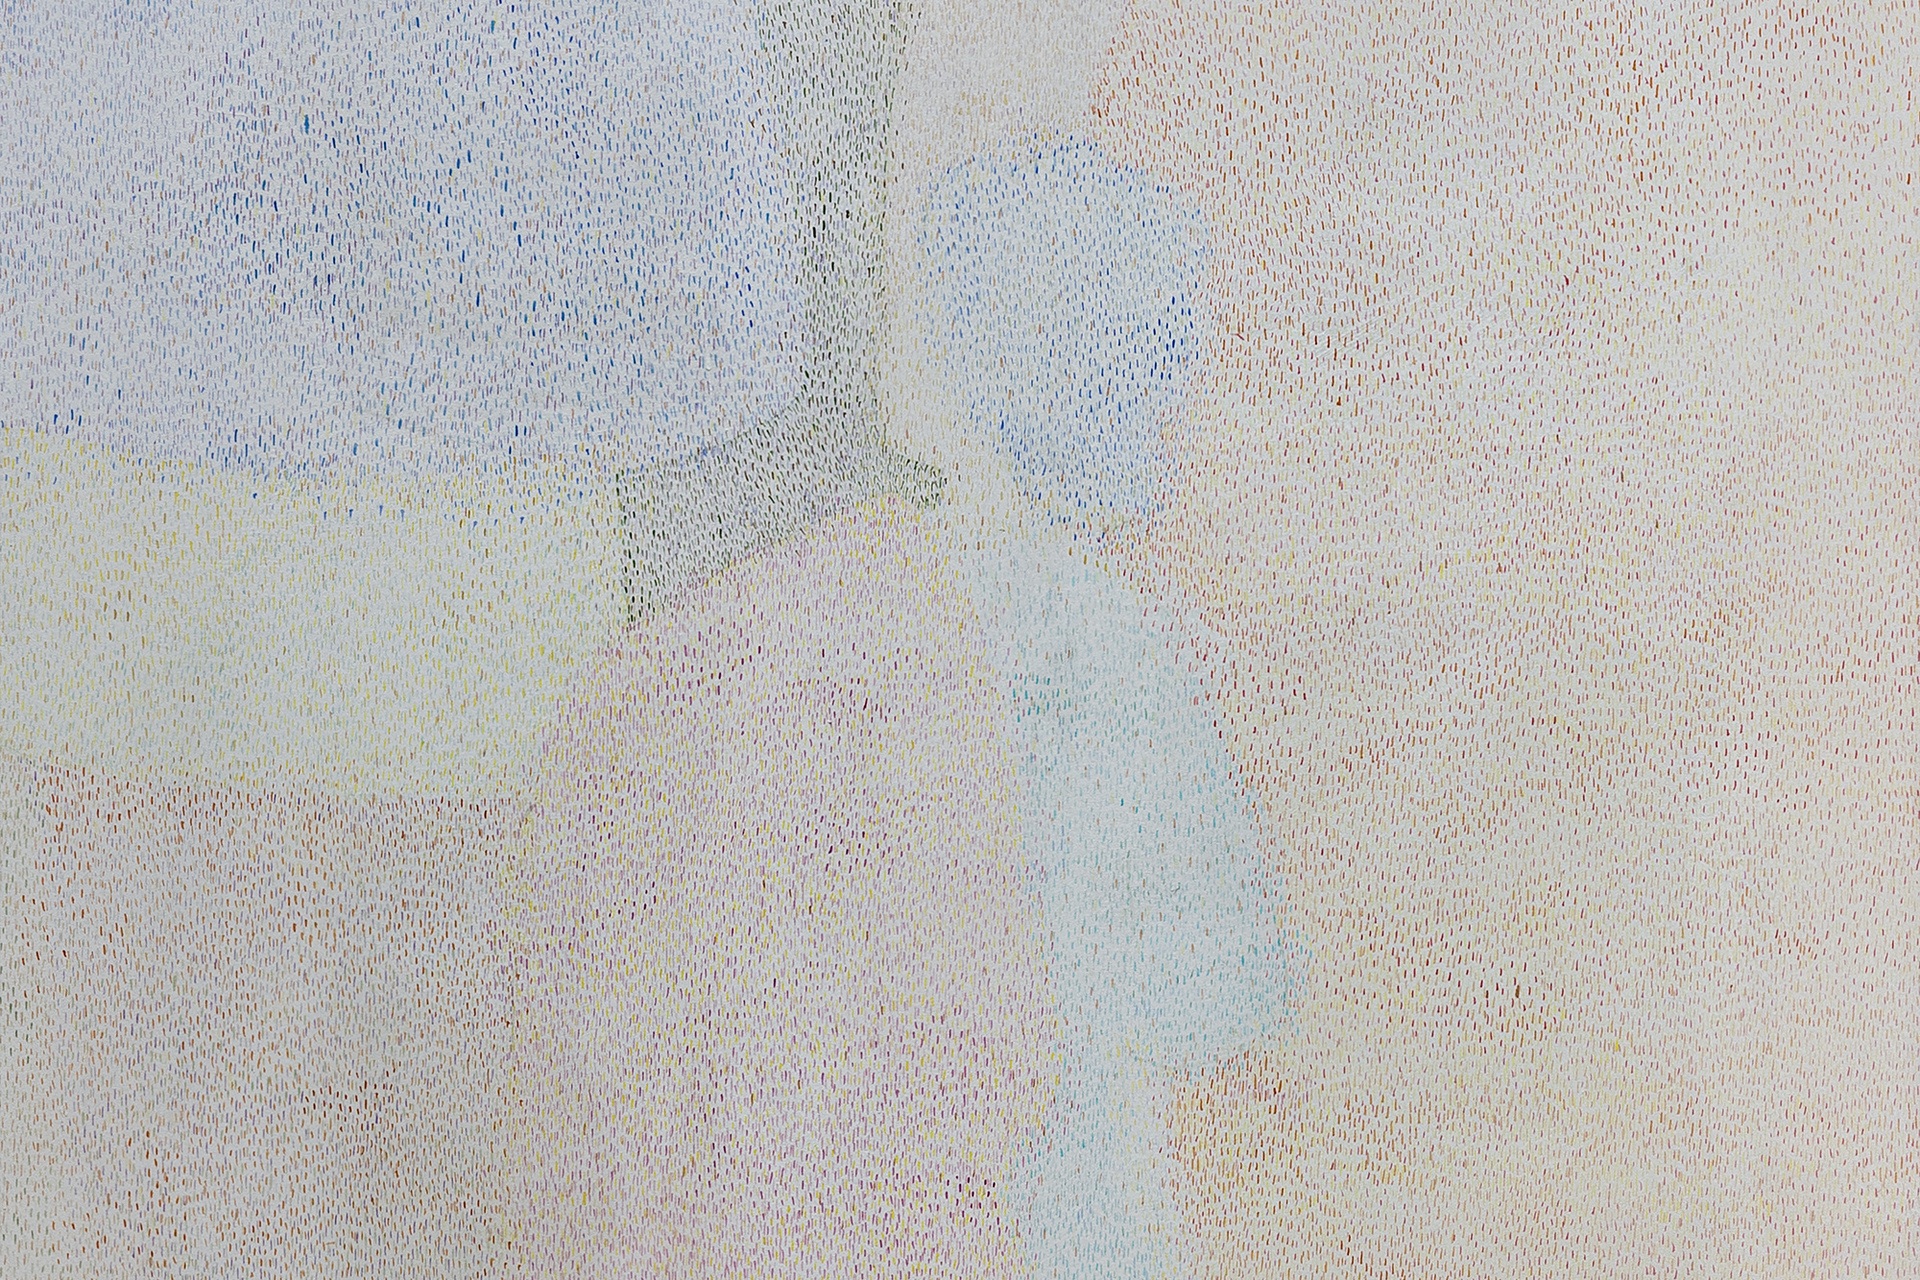 Annaliisa Krage, Imagined picture, 2022, Watercolour on canvas, 80 x 200 cm, detail